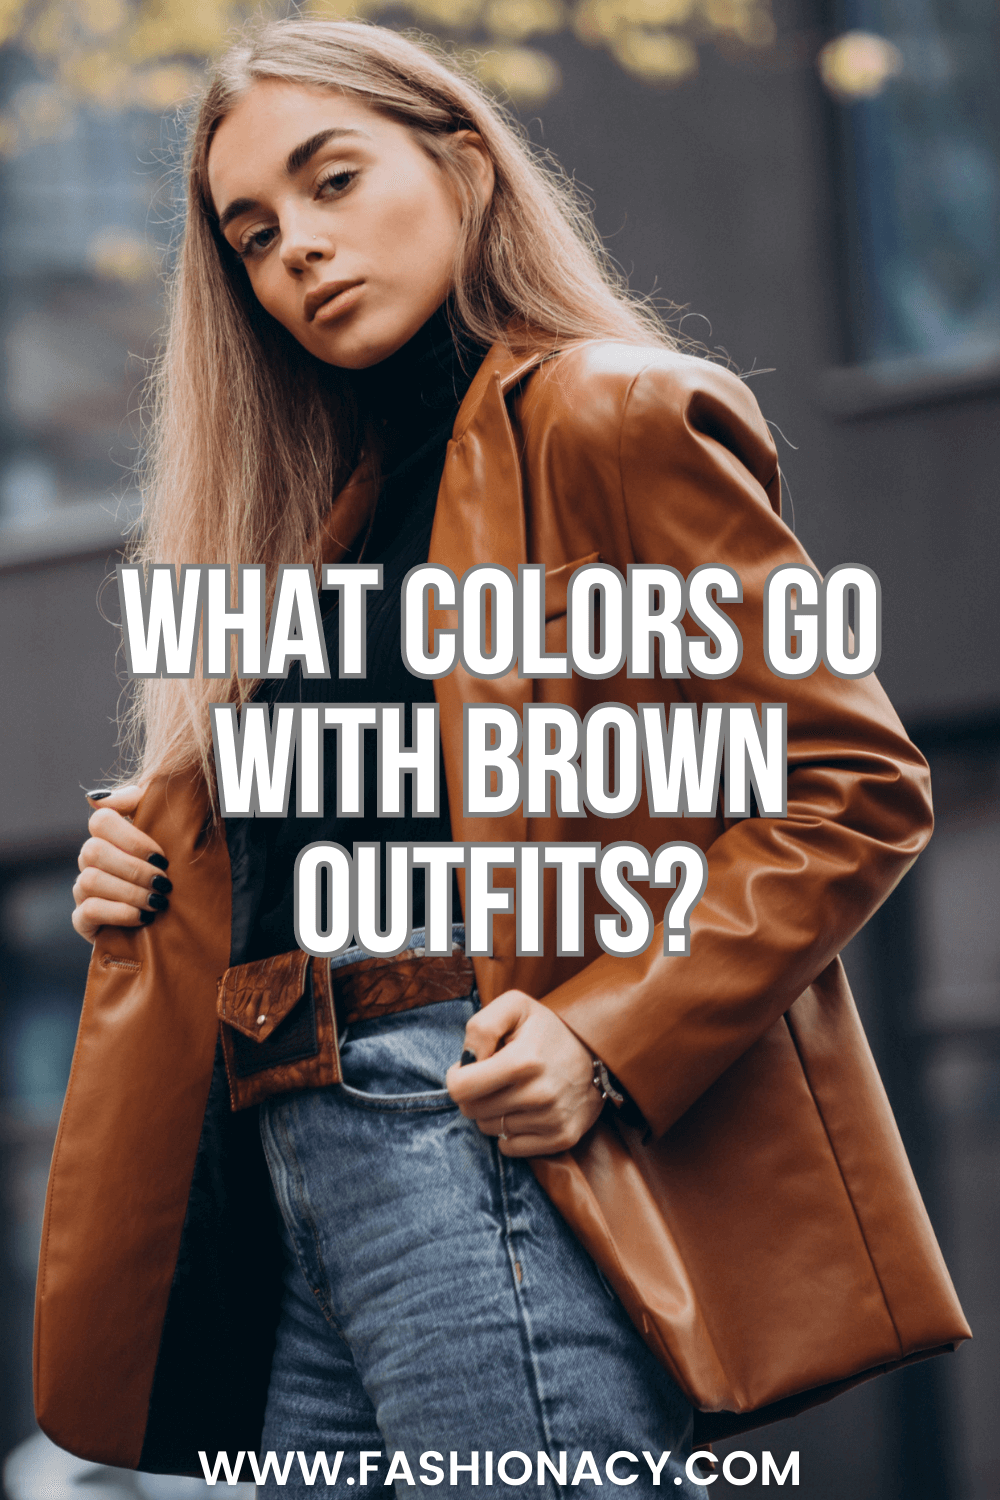 What Colors Go With Brown Outfits?